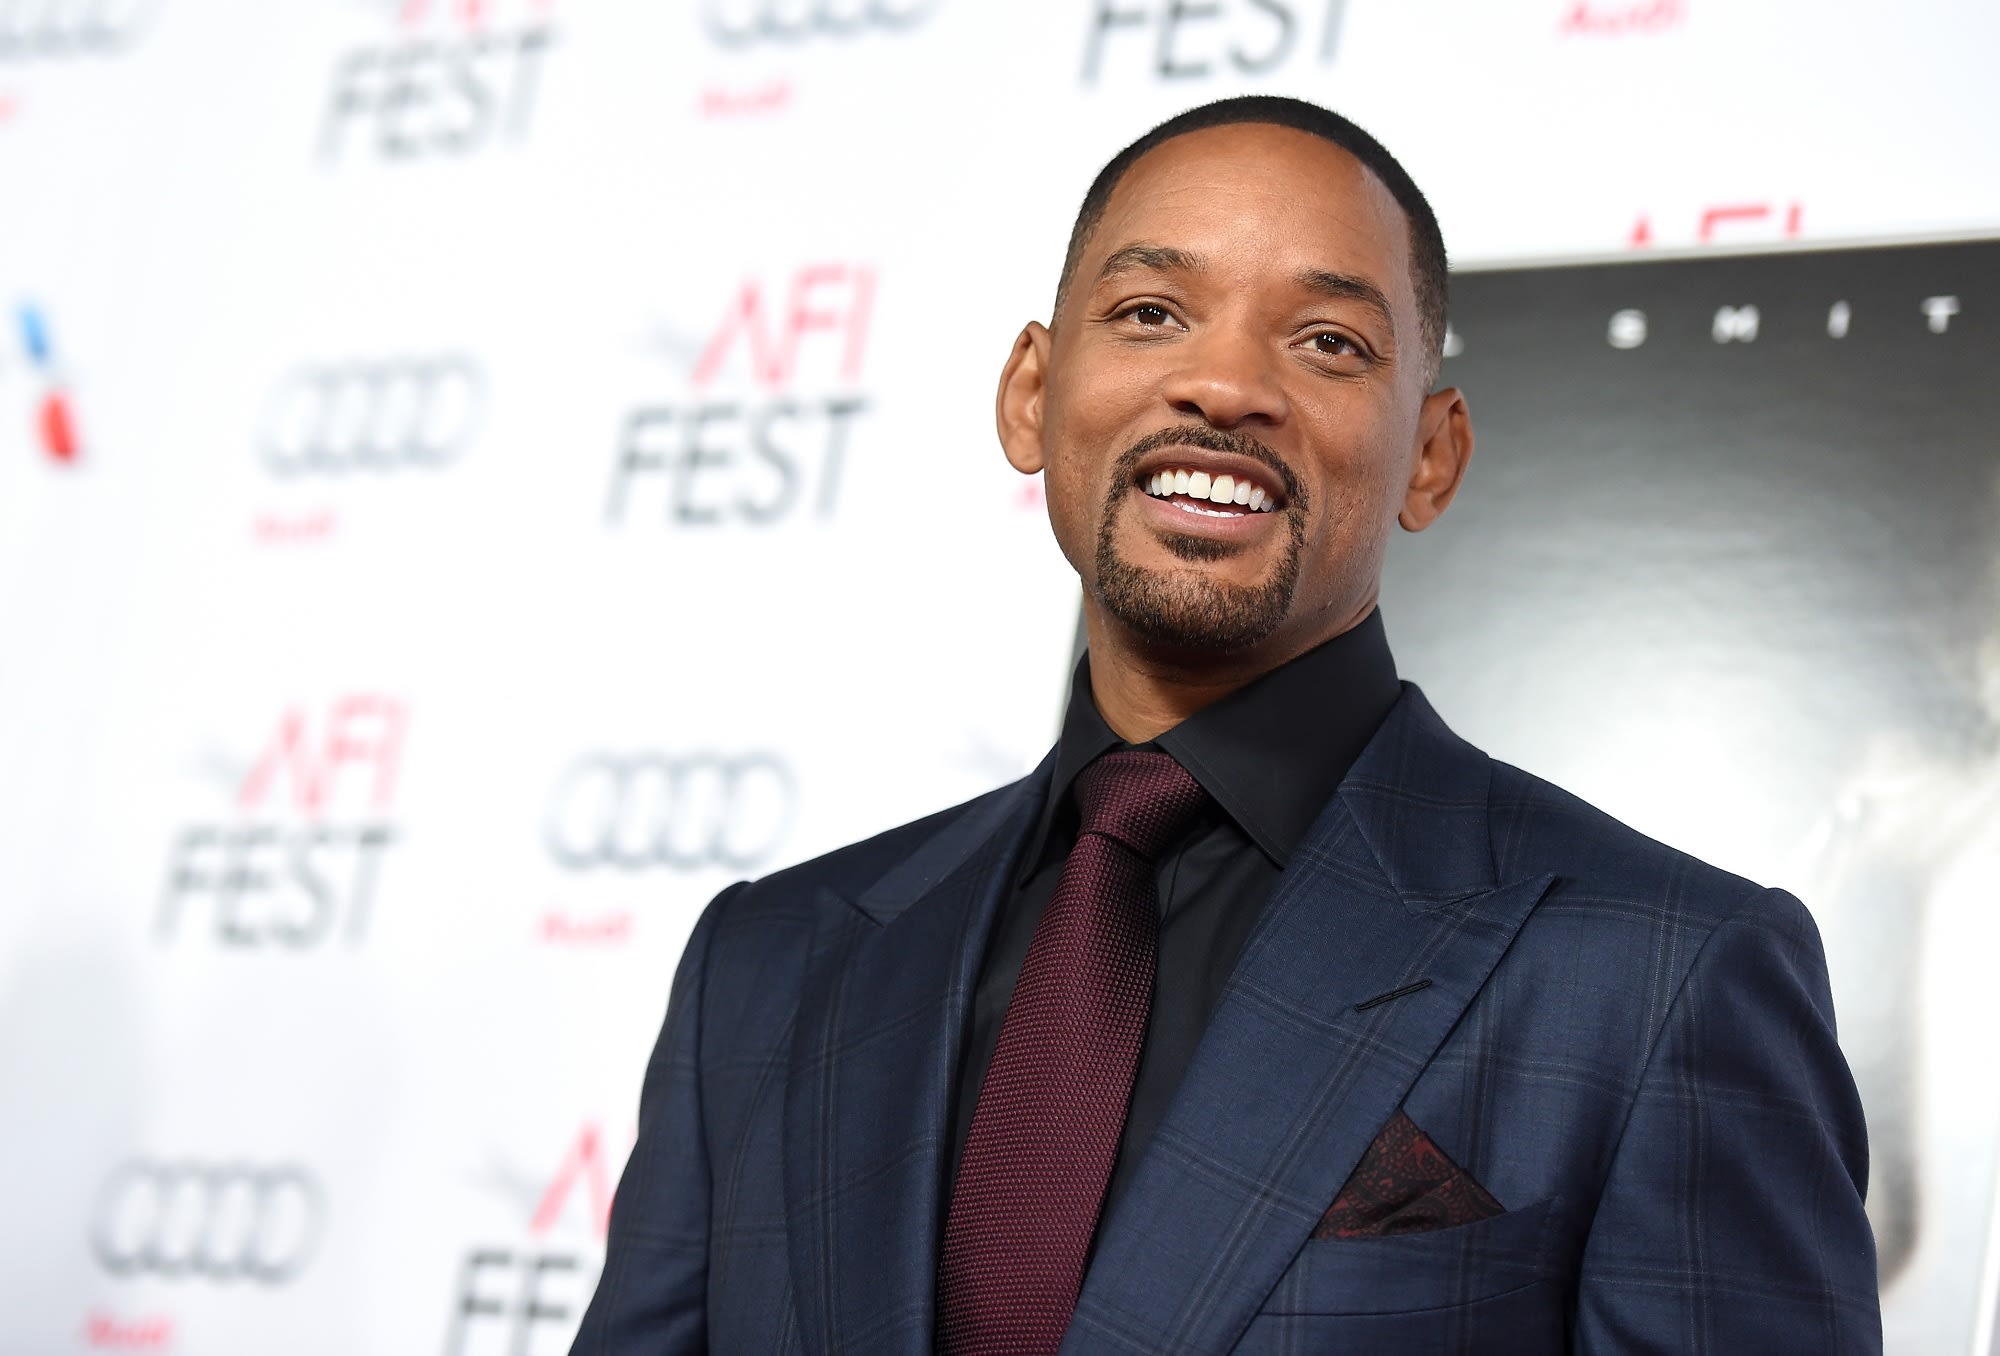 will smith accomplishments in life